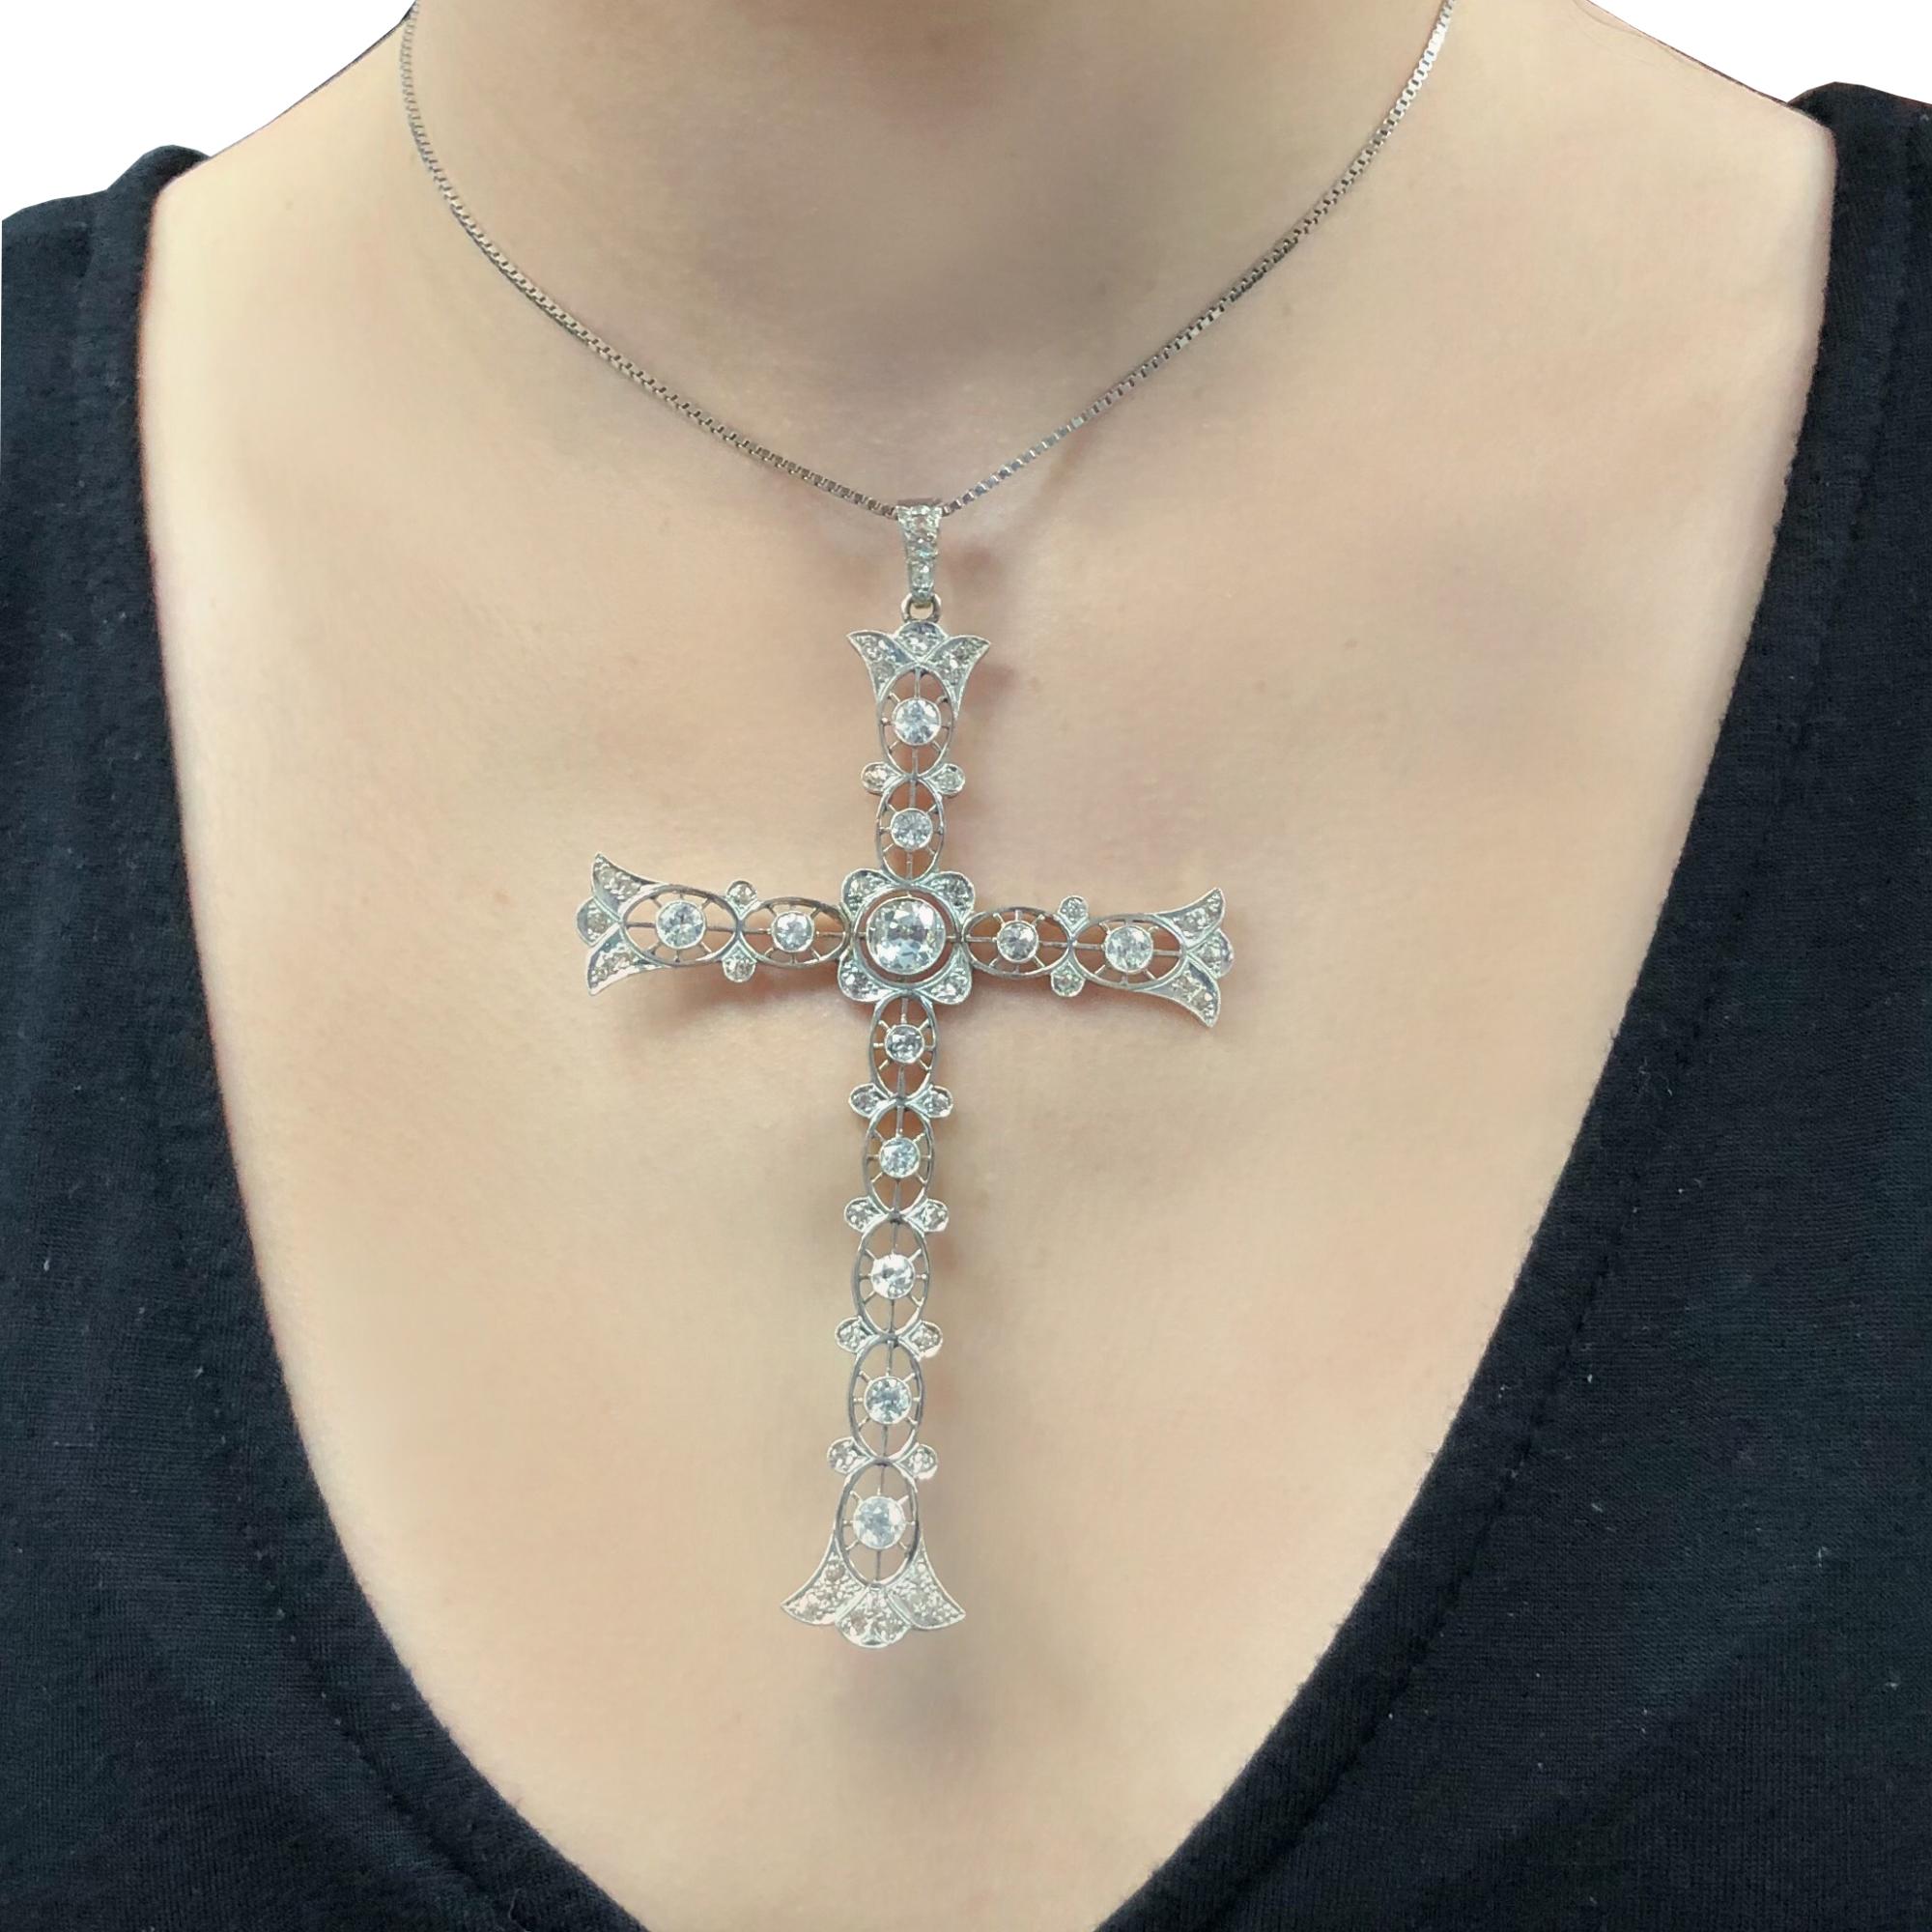 Beautiful art deco large cross pendant crafted in Platinum over 18 karat yellow gold, featuring a gorgeous Old Miner cut diamond weighing approximately 1 carat, and further embellished with 57 Old European cut diamonds weighing approximately 3